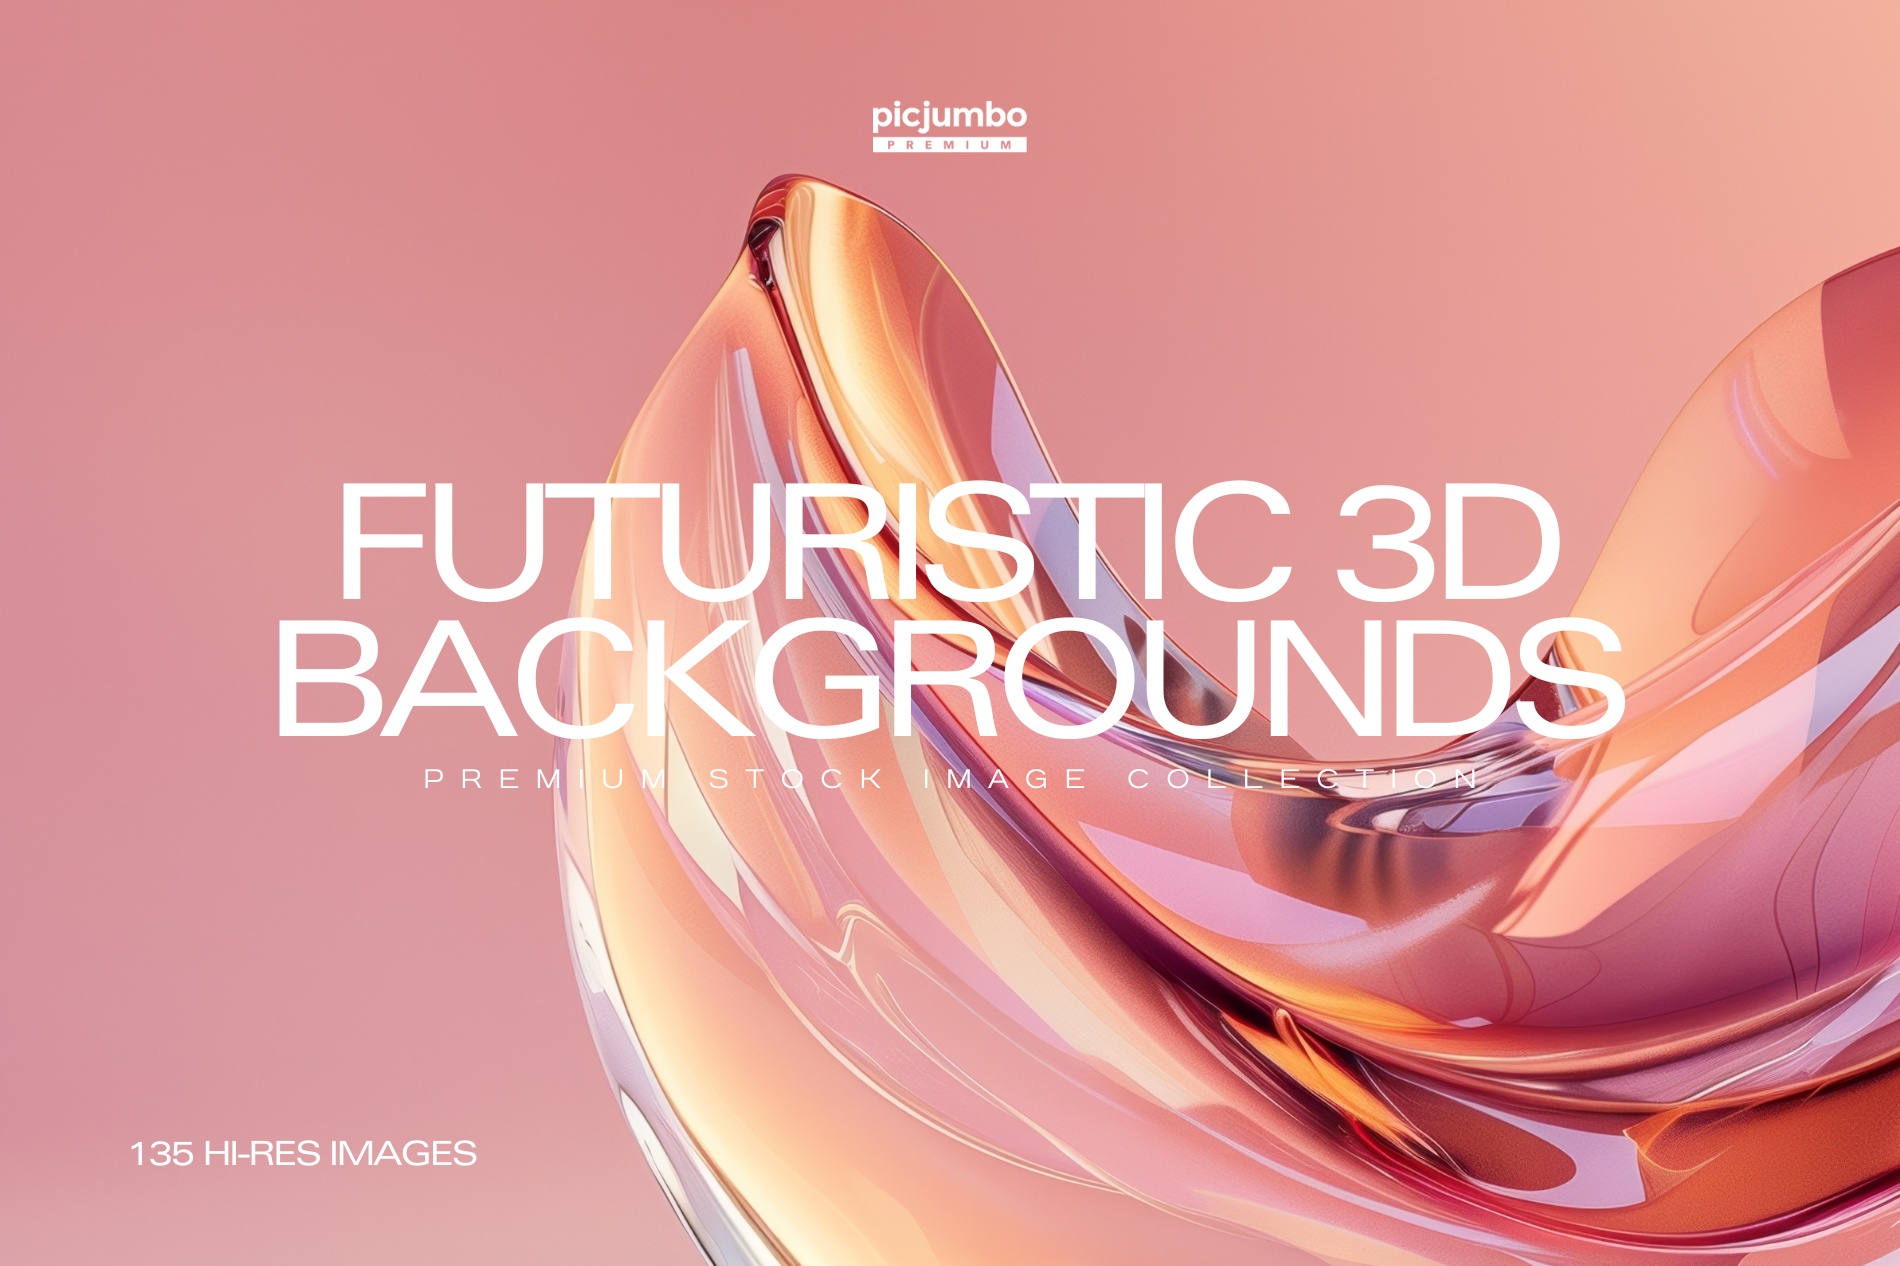 Download hi-res stock photos from our Futuristic 3D Backgrounds PREMIUM Collection!